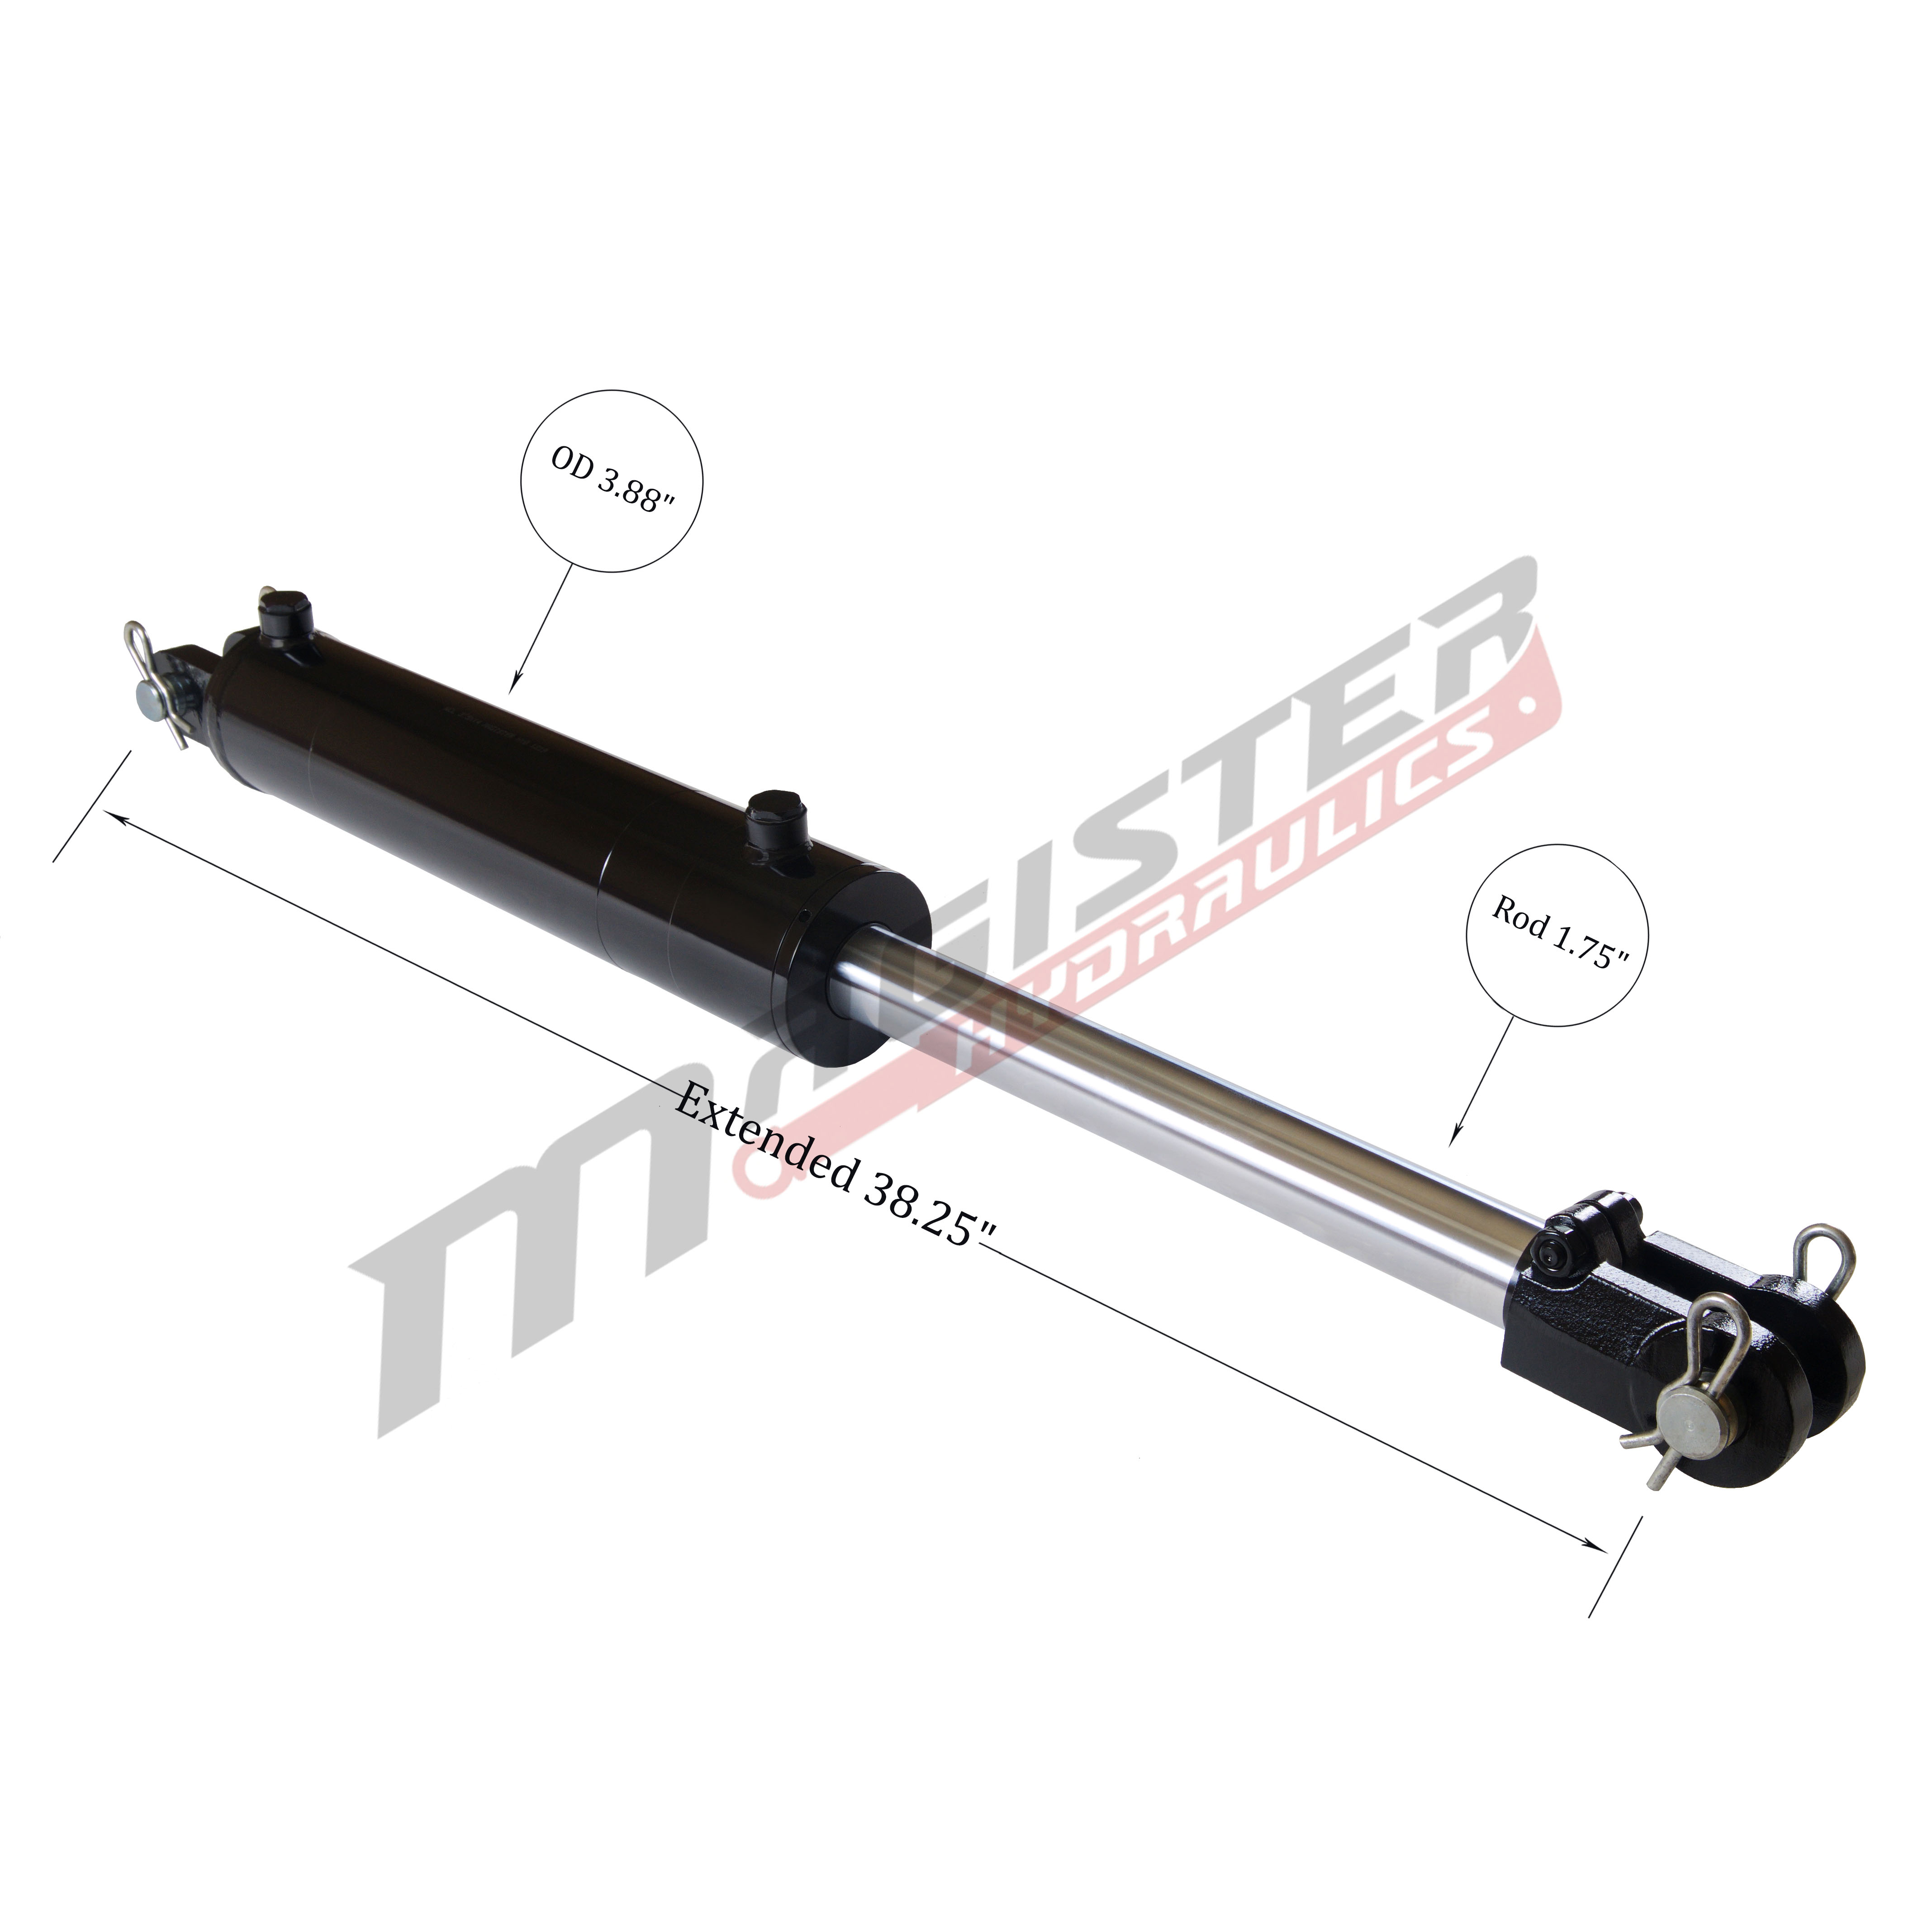 3.5 bore x 14 stroke hydraulic cylinder, welded clevis double acting cylinder | Magister Hydraulics